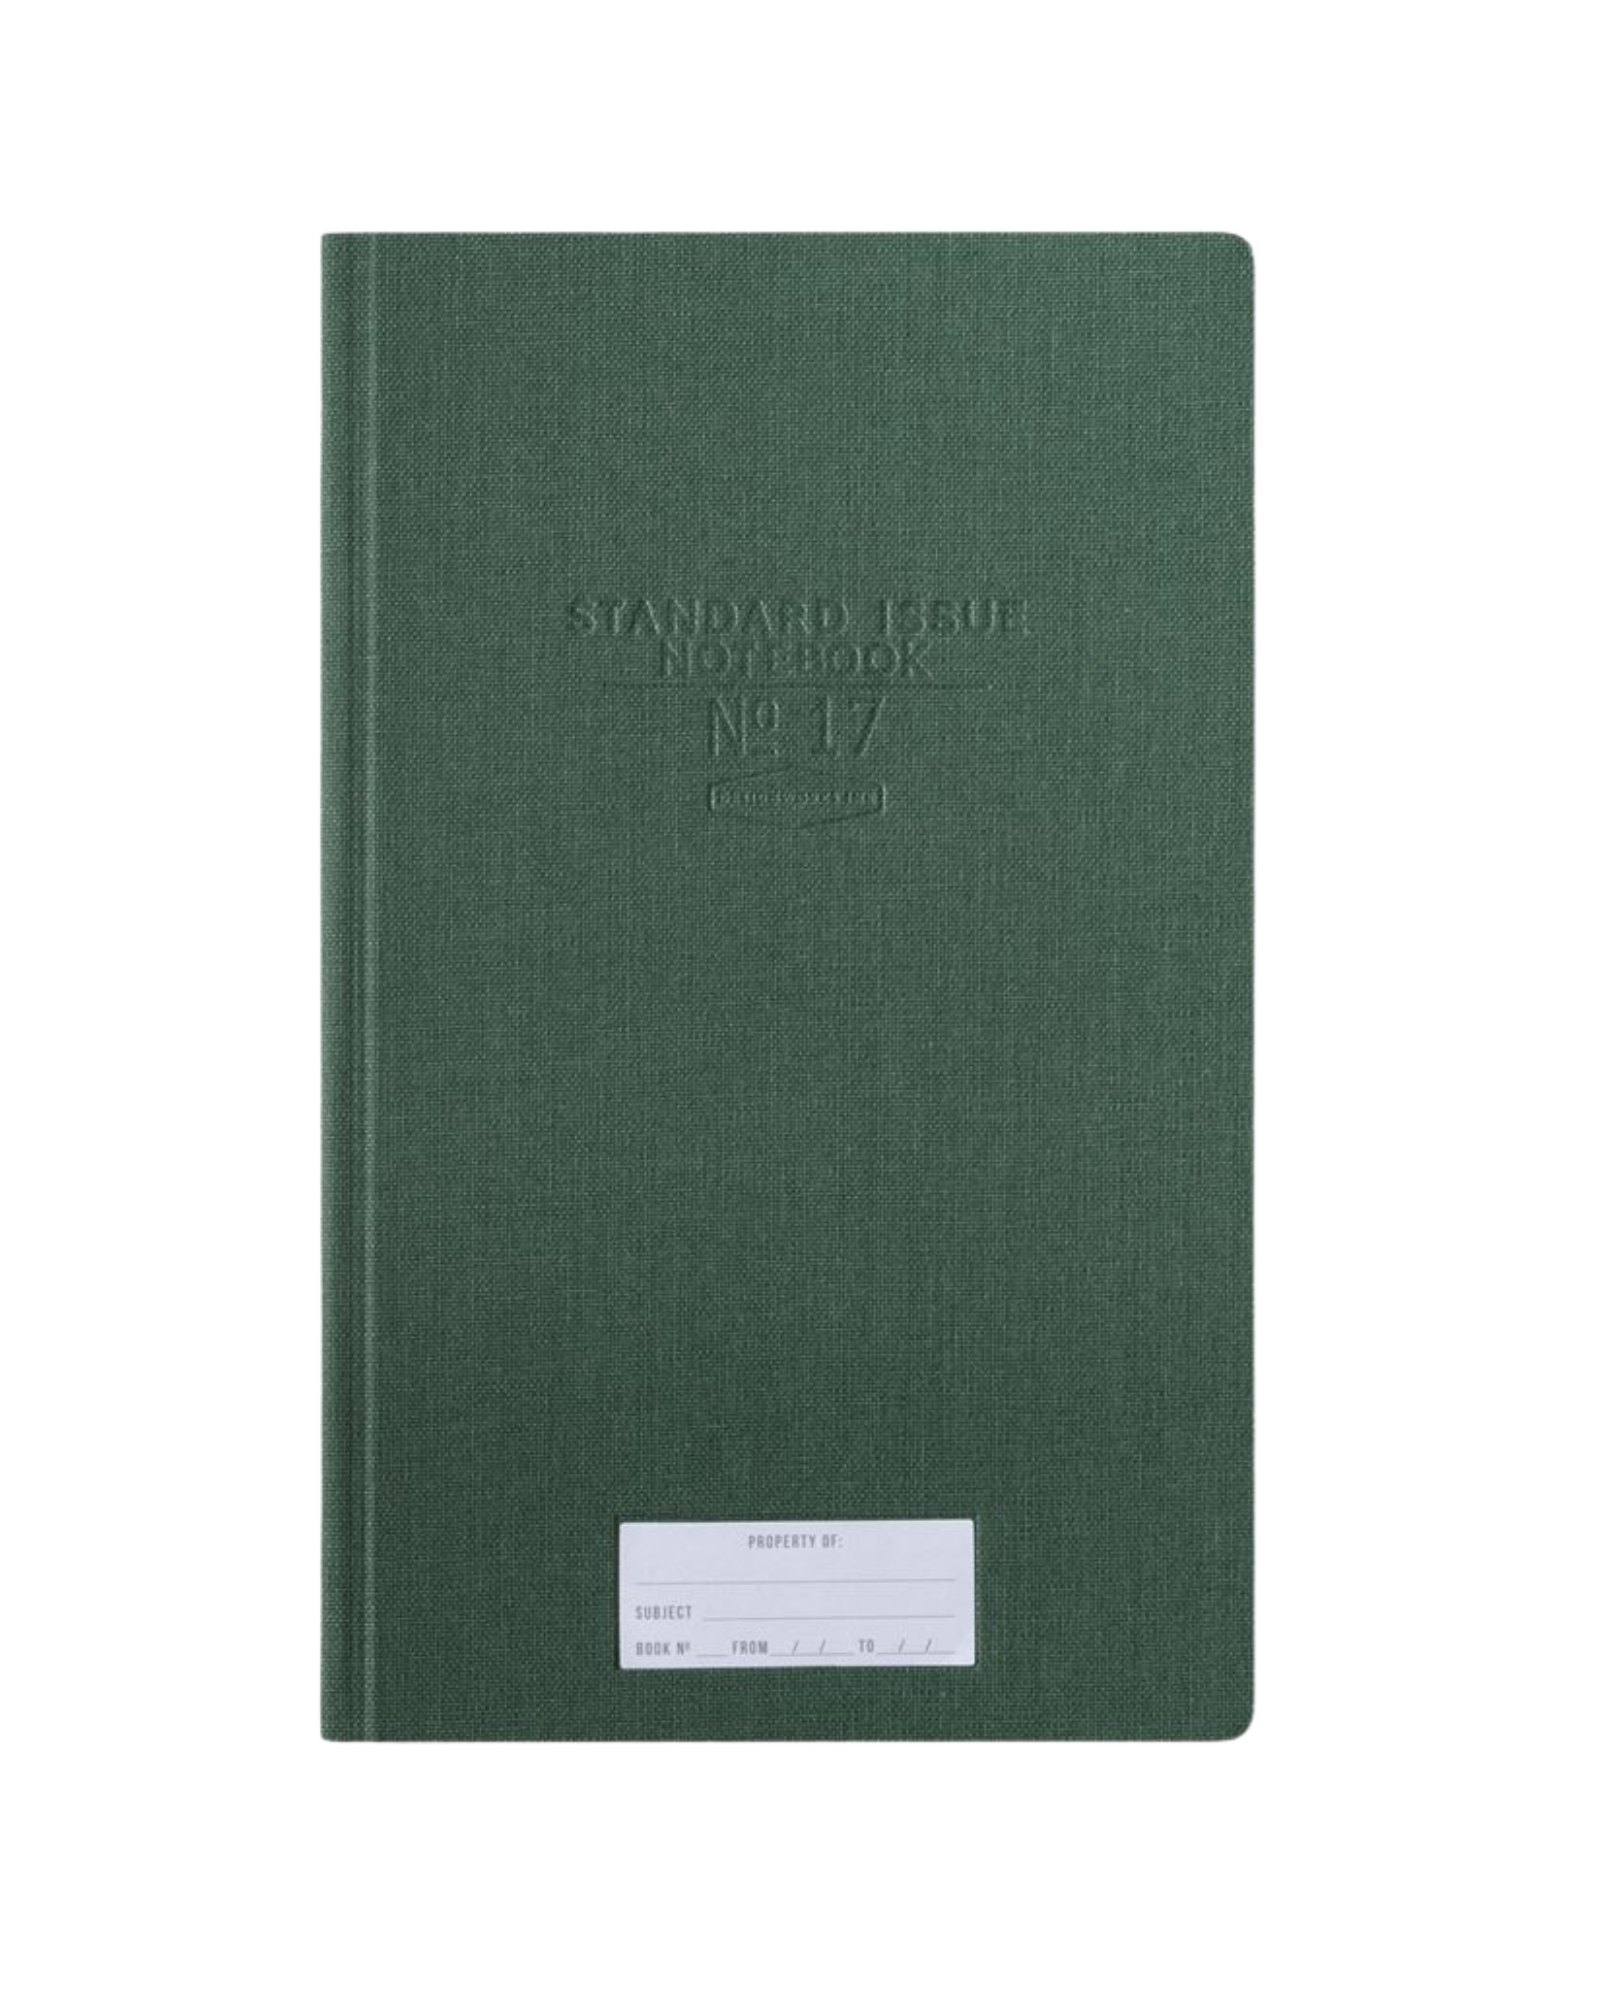 Tall green journal with small white label bottom center